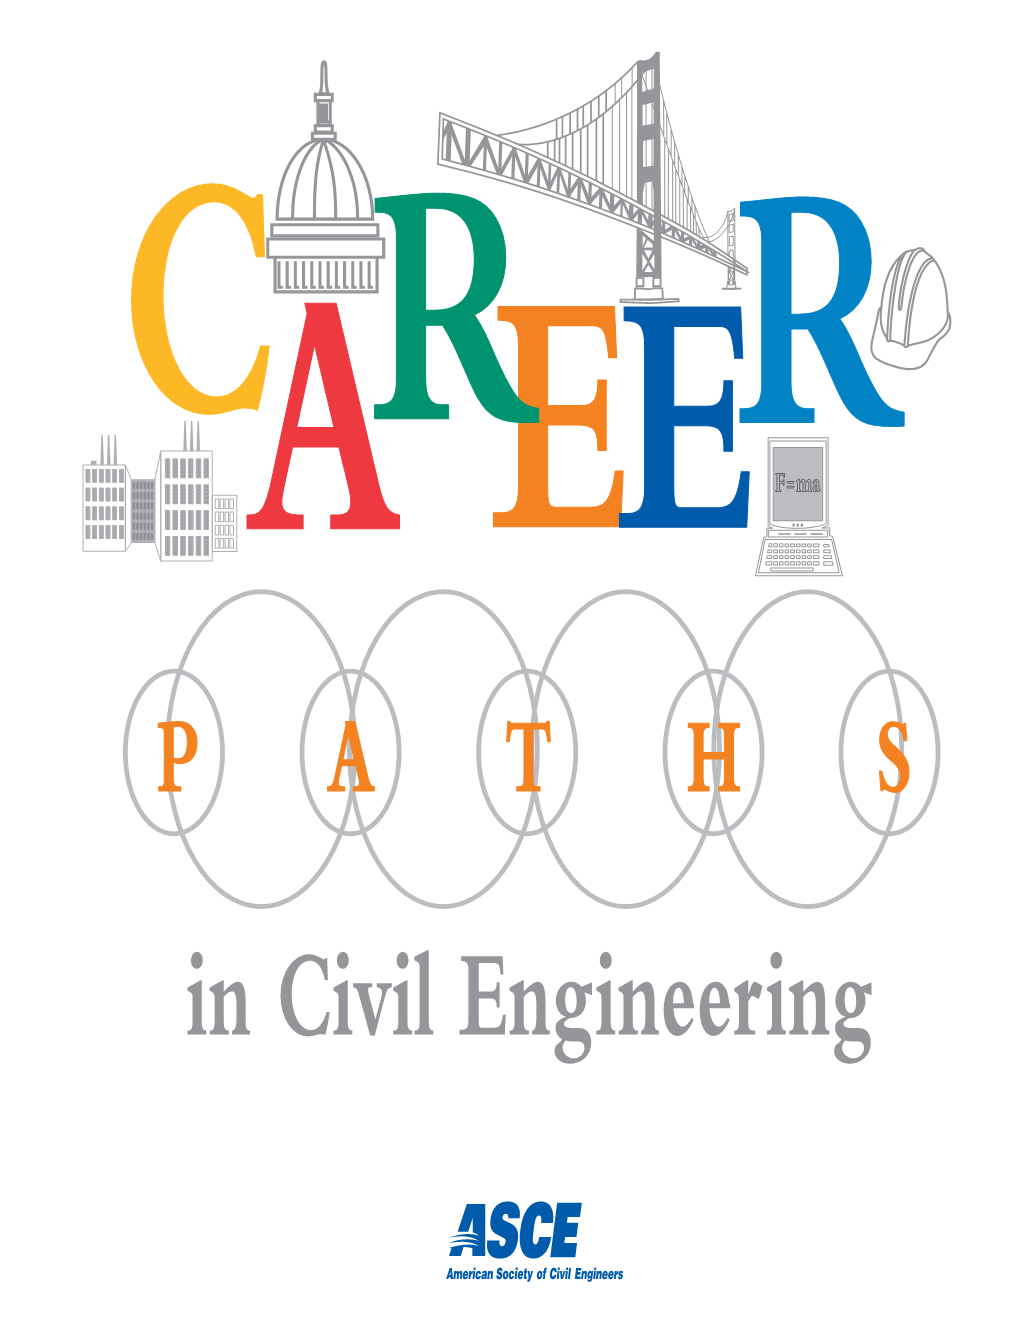 In Civil Engineering C R R Seek out the Career Path That Best a EE Fits Your Goals and Will Be Most Satisfying to You